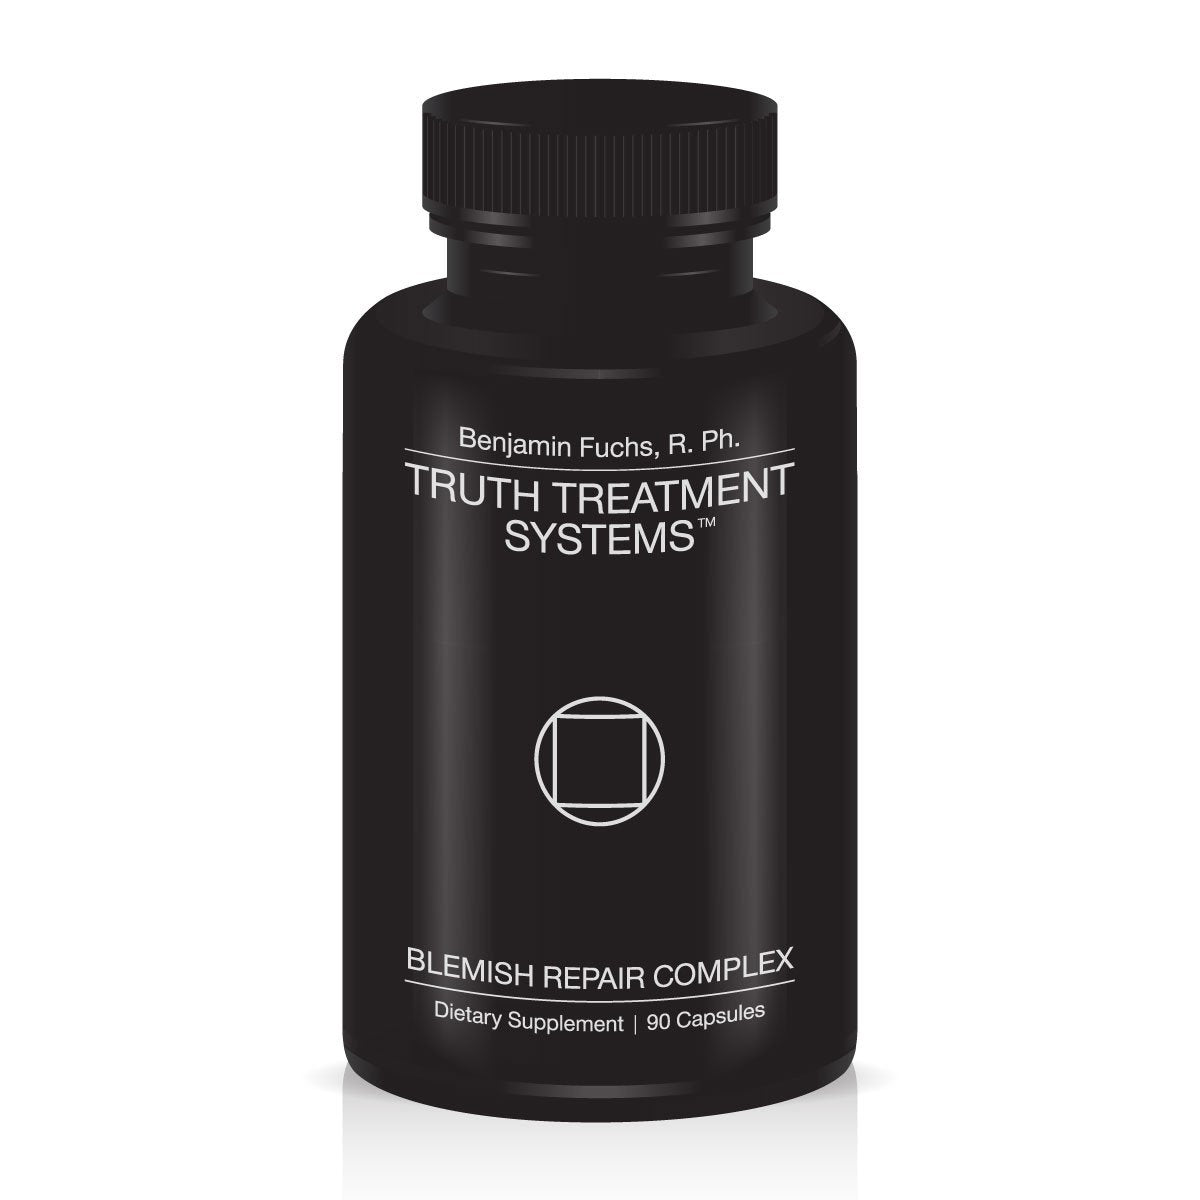 Collagen Recovery Complex - Multi-functional anti-aging formula.